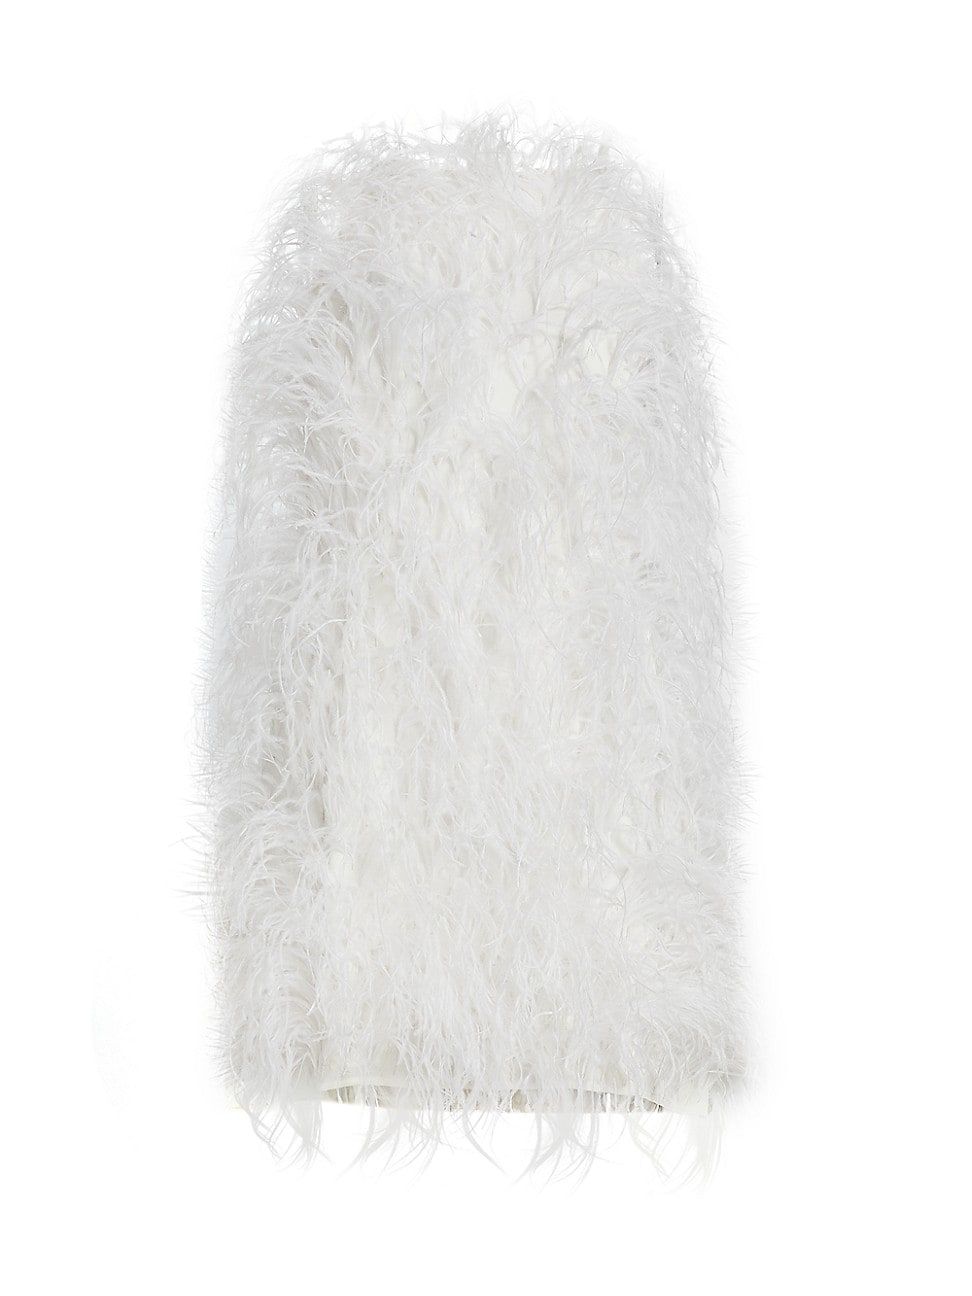 Shannon Ostrich Feather Dress | Saks Fifth Avenue